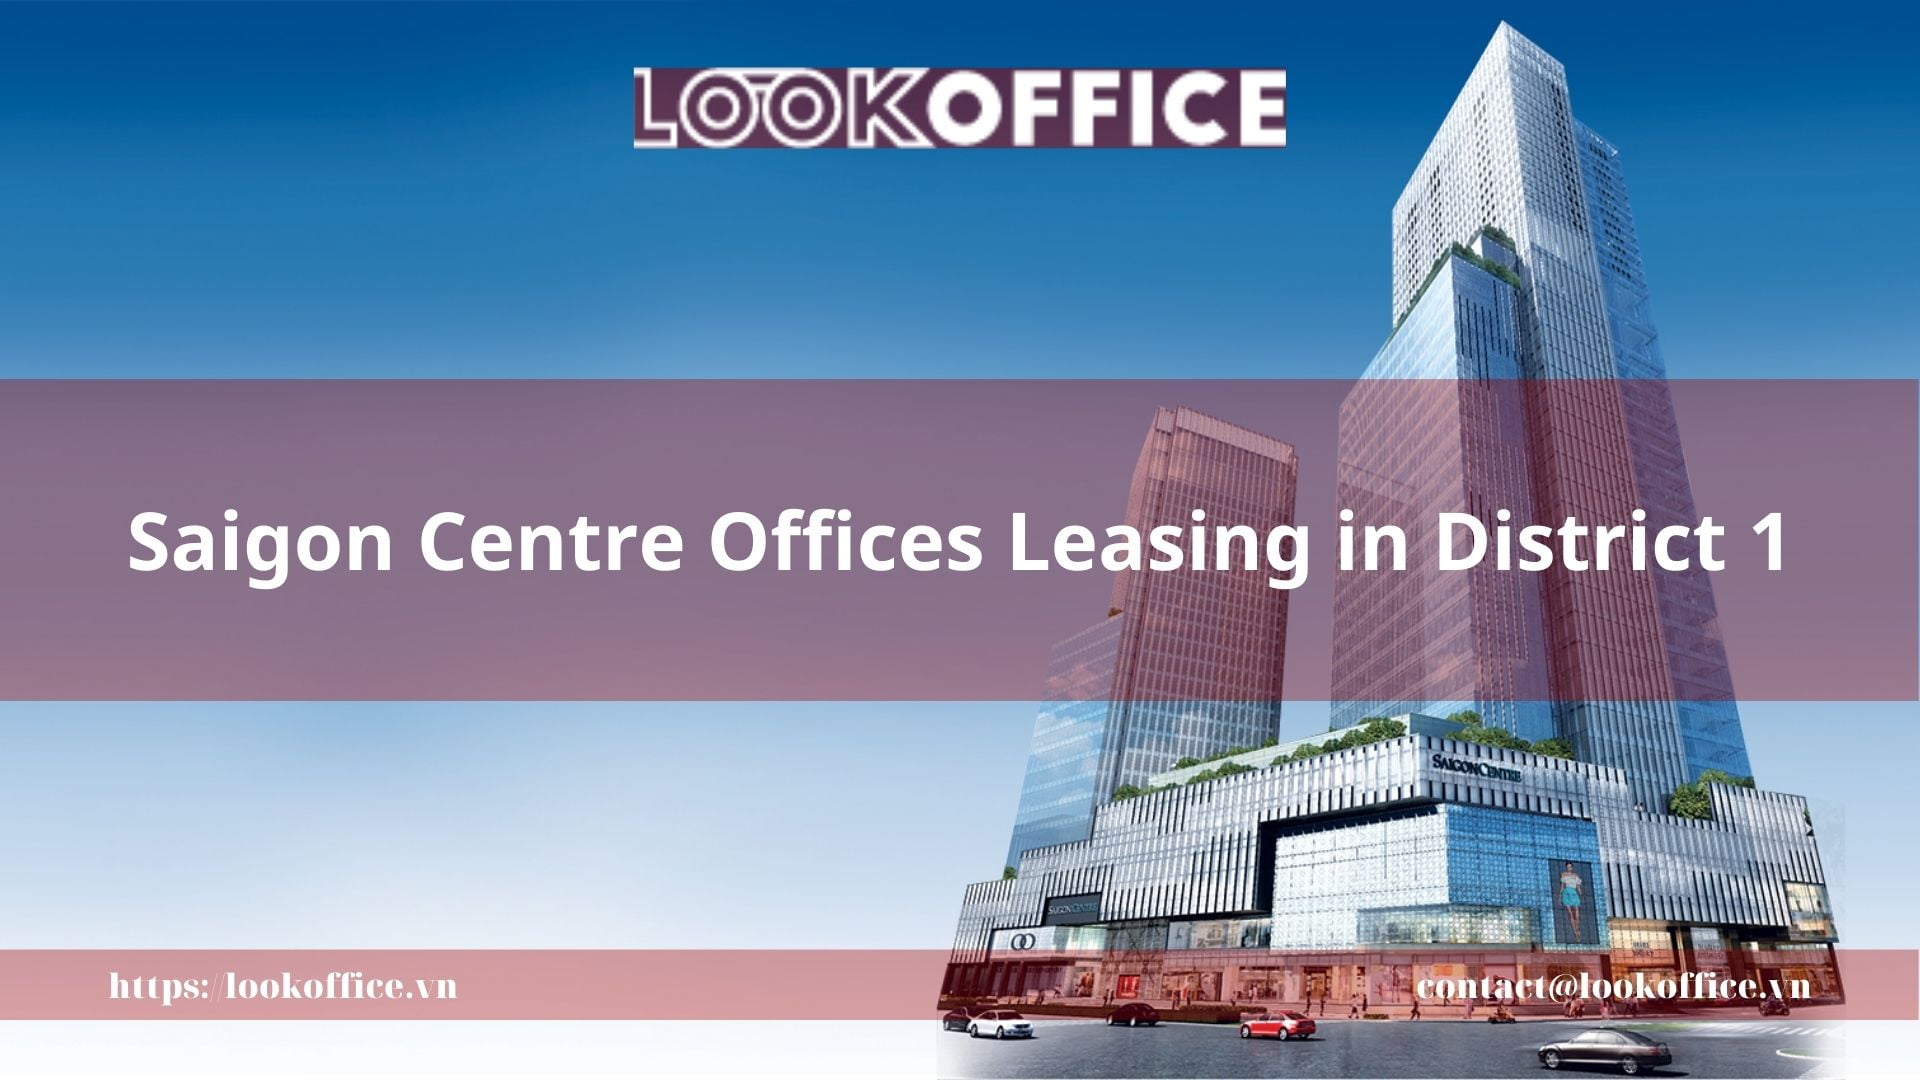 Saigon Centre Offices Leasing in District 1